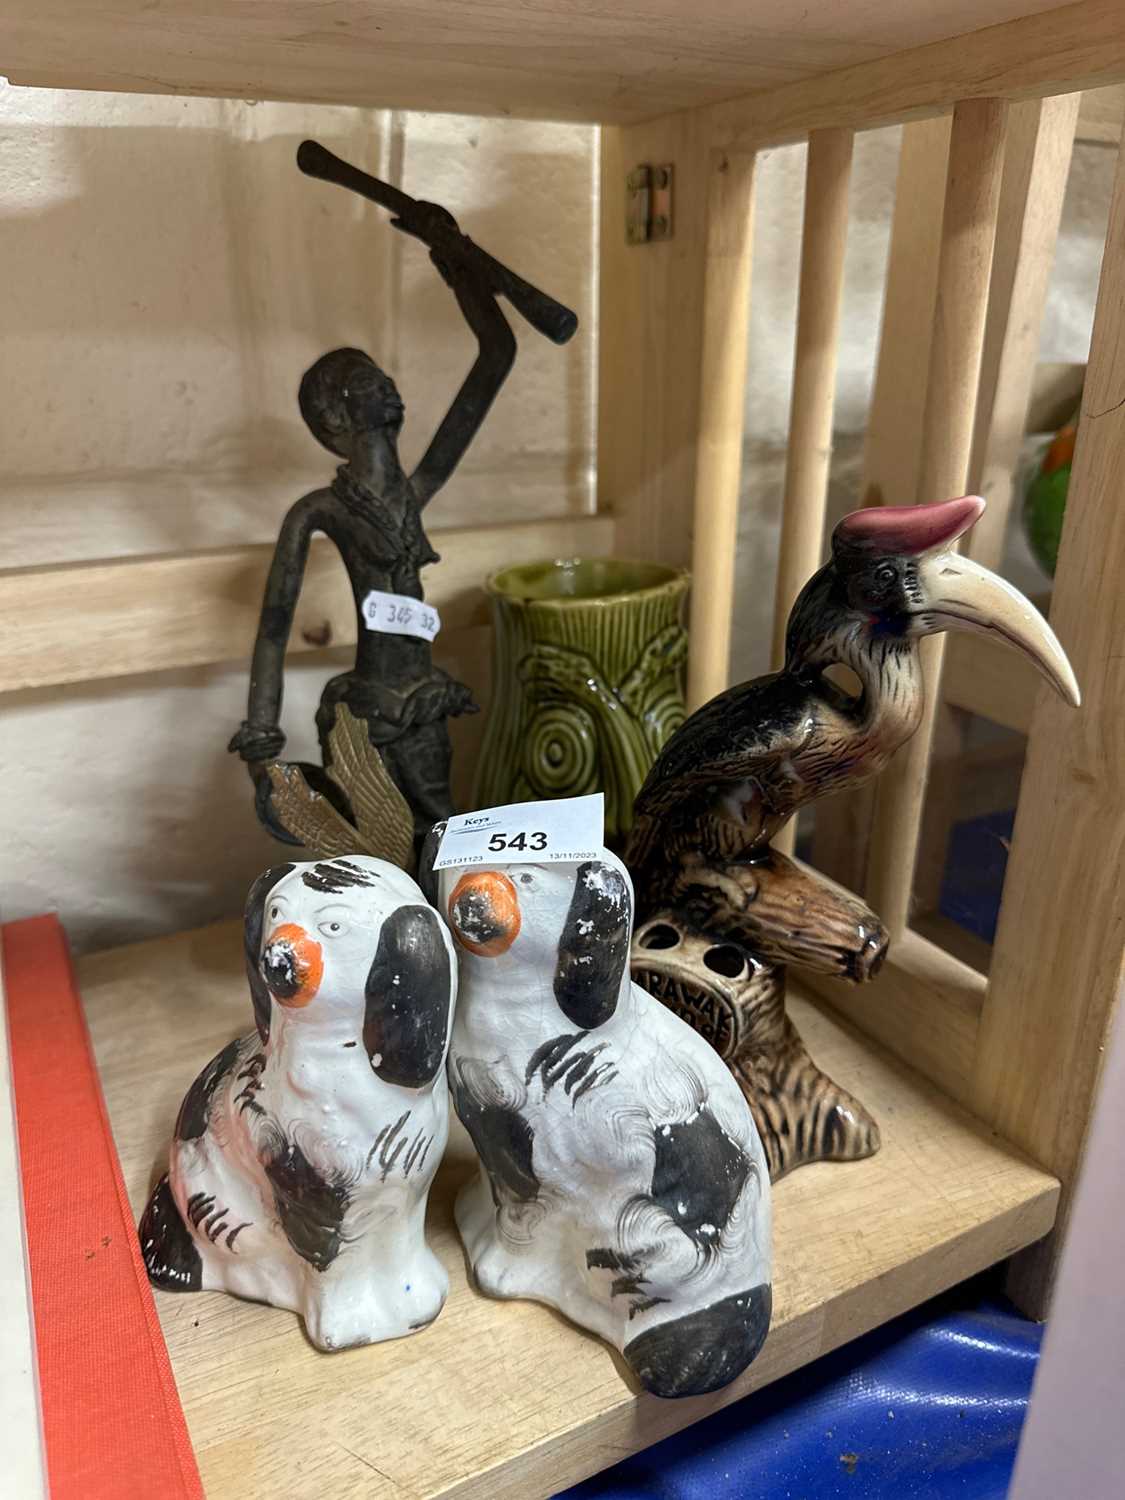 Mixed Lot: Small pair of Staffordshire dogs, celery vase, bird figurine and other items